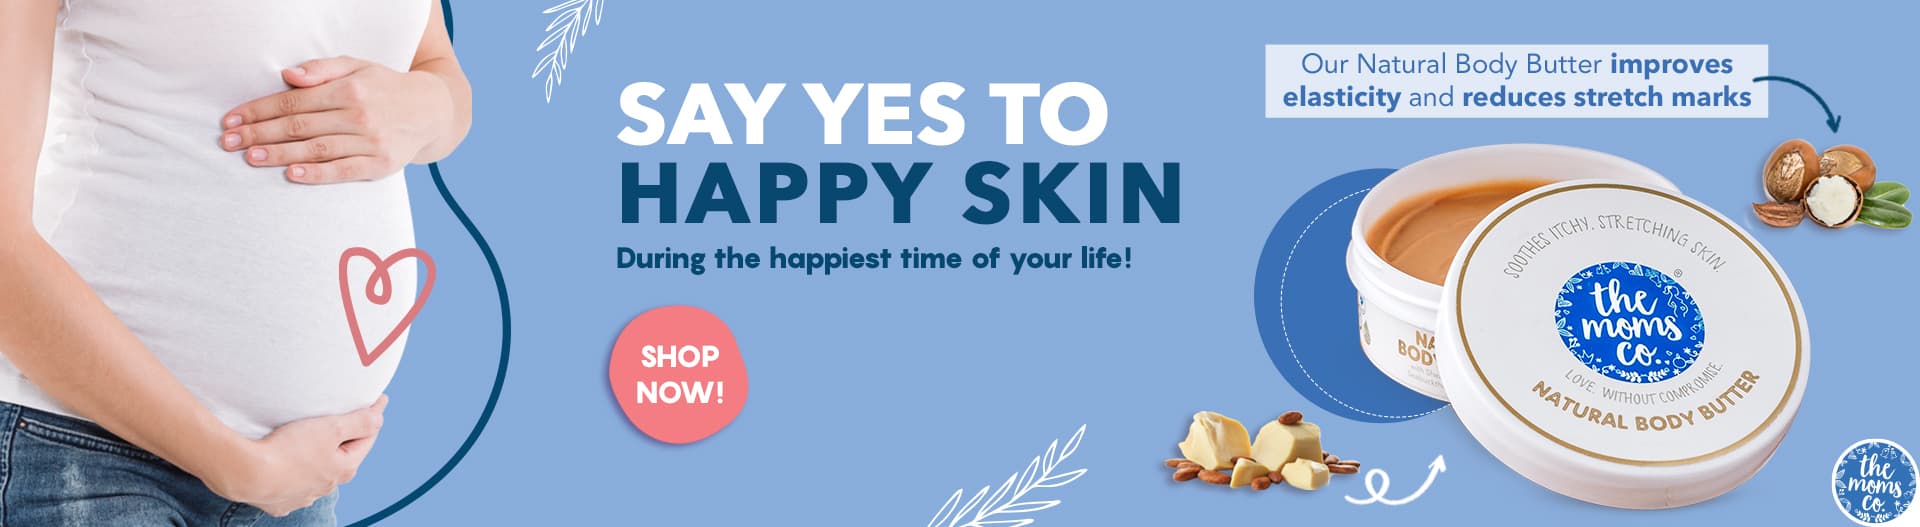 Pregnancy Care - Say yes to happy skin